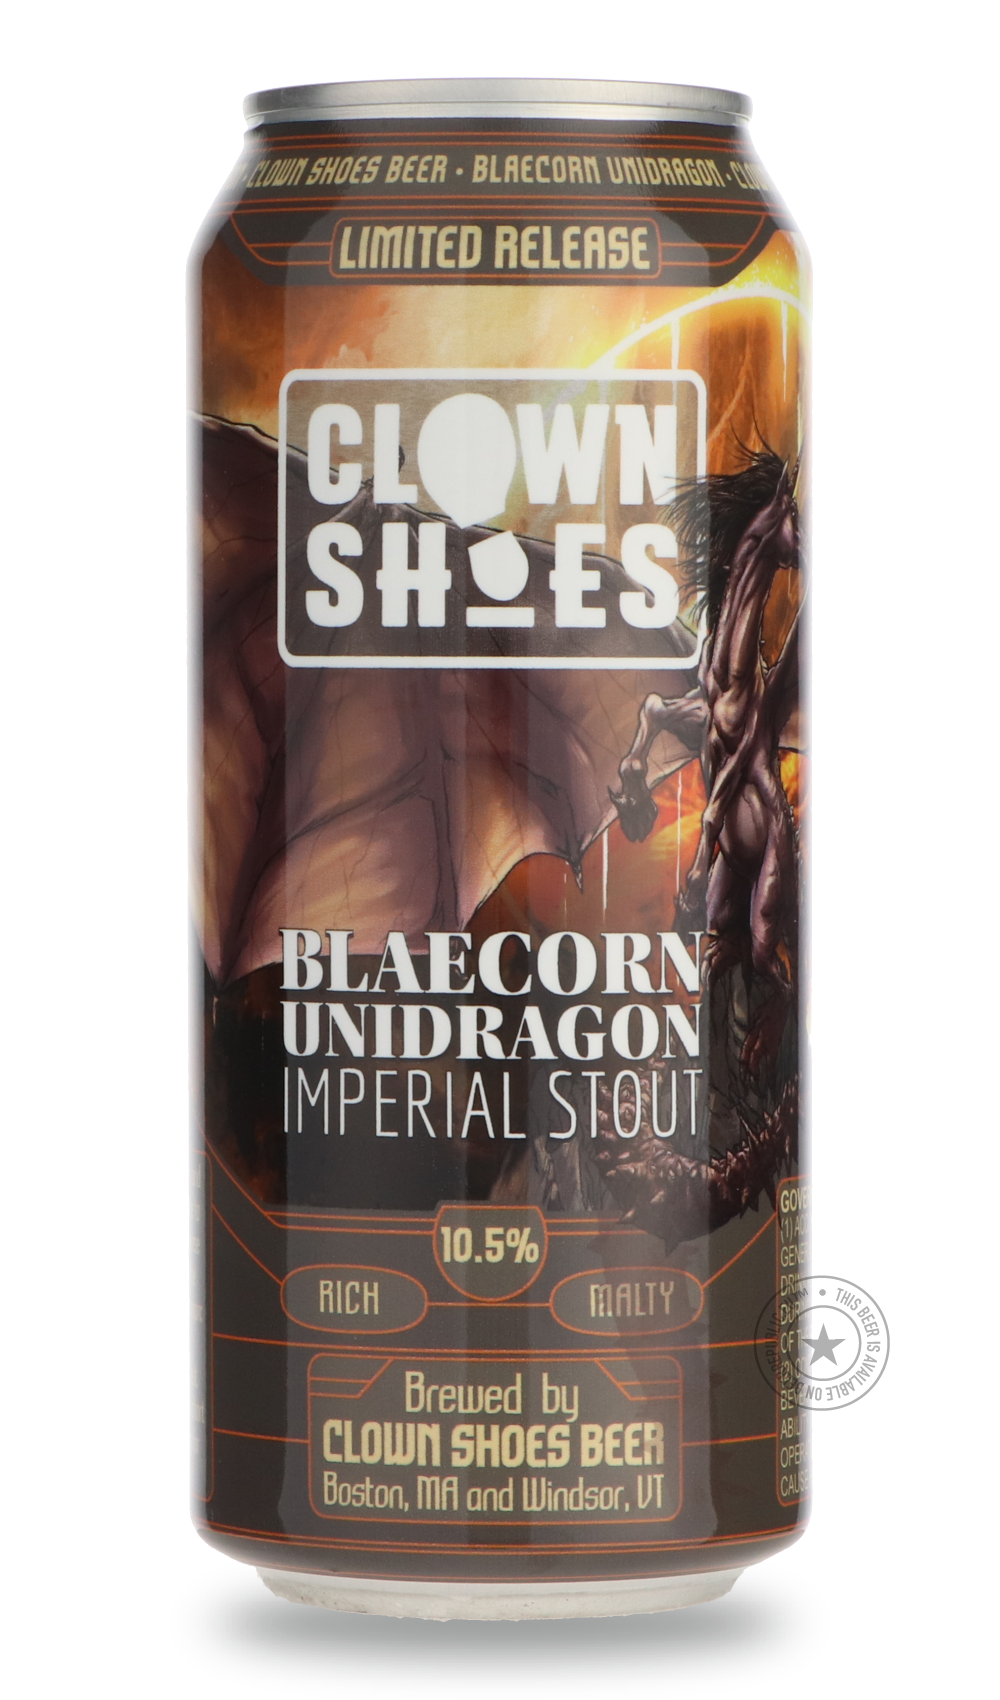 -Clown Shoes- Blaecorn Unidragon-Stout & Porter- Only @ Beer Republic - The best online beer store for American & Canadian craft beer - Buy beer online from the USA and Canada - Bier online kopen - Amerikaans bier kopen - Craft beer store - Craft beer kopen - Amerikanisch bier kaufen - Bier online kaufen - Acheter biere online - IPA - Stout - Porter - New England IPA - Hazy IPA - Imperial Stout - Barrel Aged - Barrel Aged Imperial Stout - Brown - Dark beer - Blond - Blonde - Pilsner - Lager - Wheat - Weizen